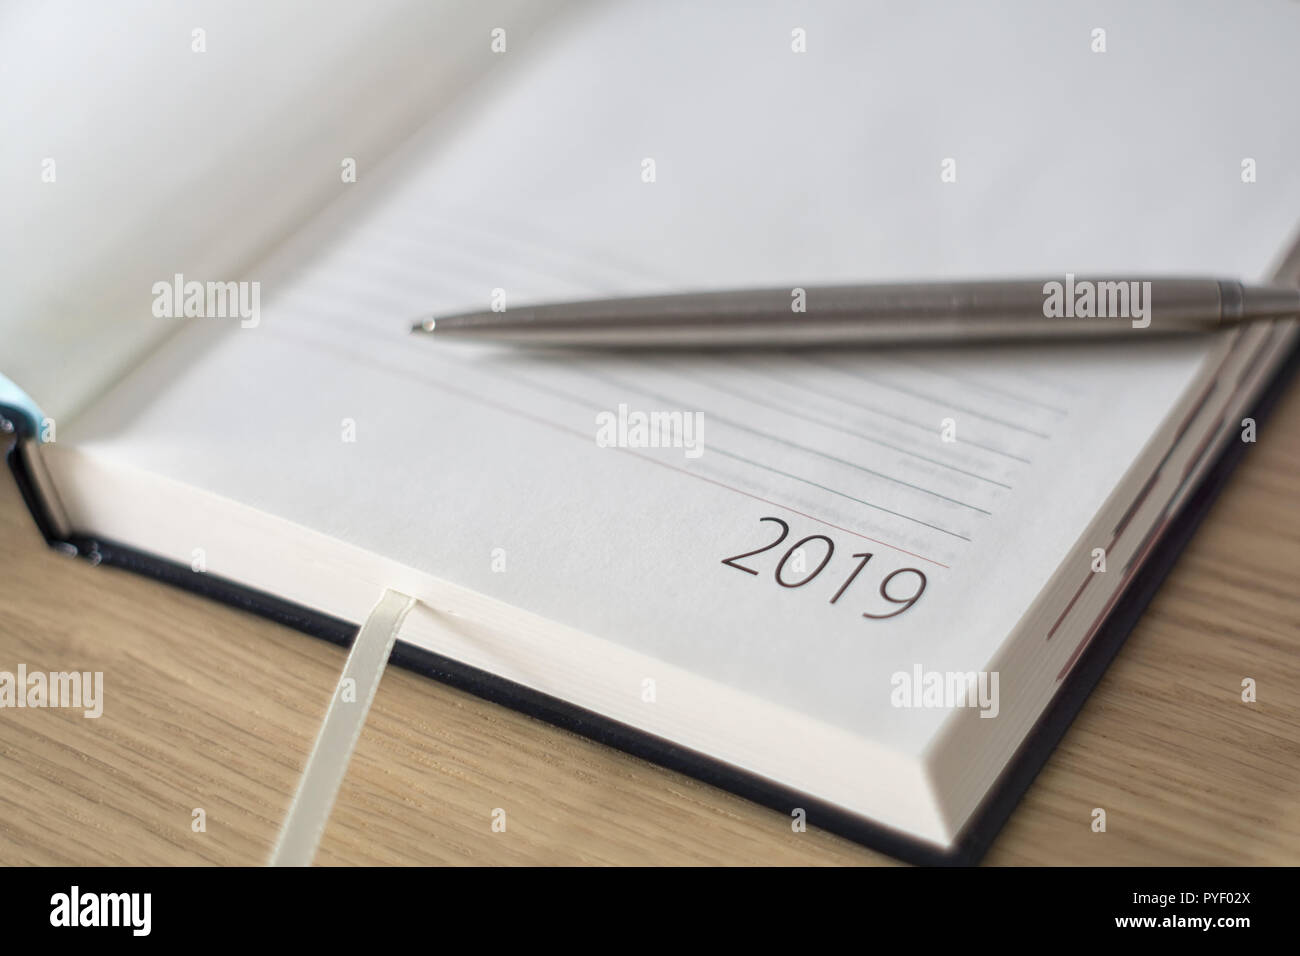 New Year 2019 office organizer calendar, smartphone, glasses and sliver ballpen on wooden desk.  Image with copy space. Selective focus. Stock Photo